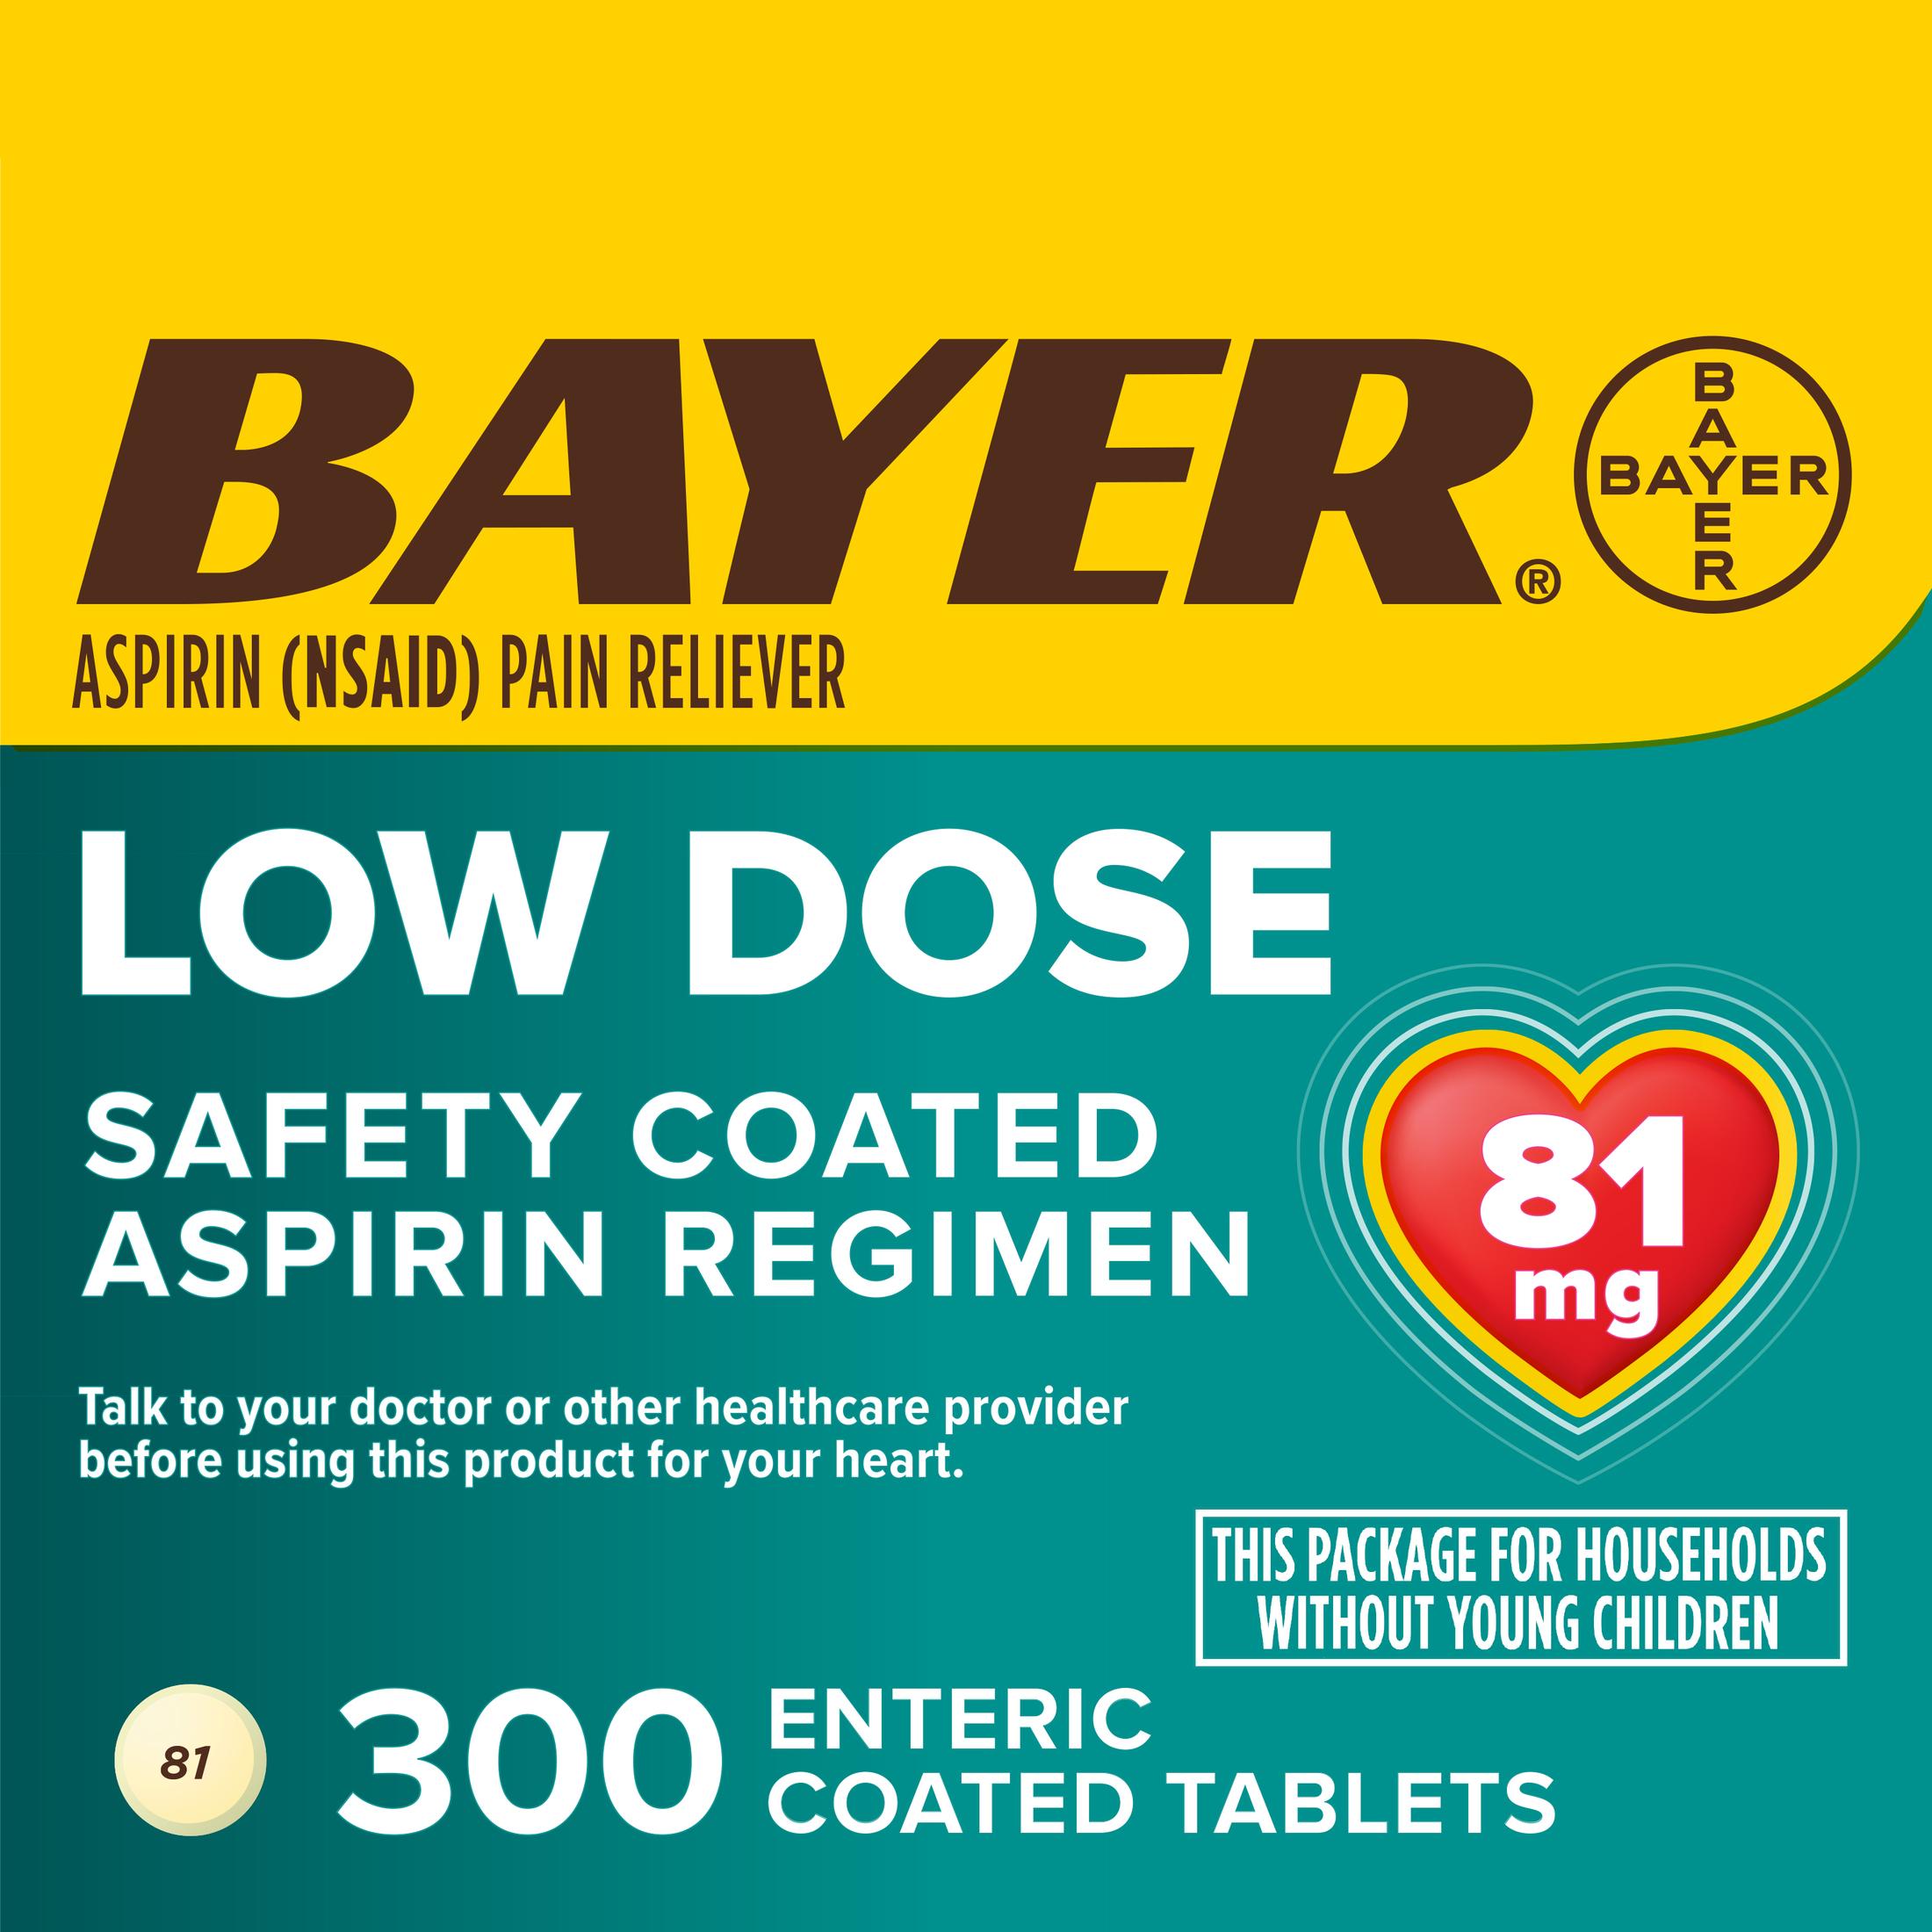 Aspirin Regimen Bayer Low Dose Pain Reliever Enteric Coated Tablets, 81mg, 300 Count - image 1 of 16